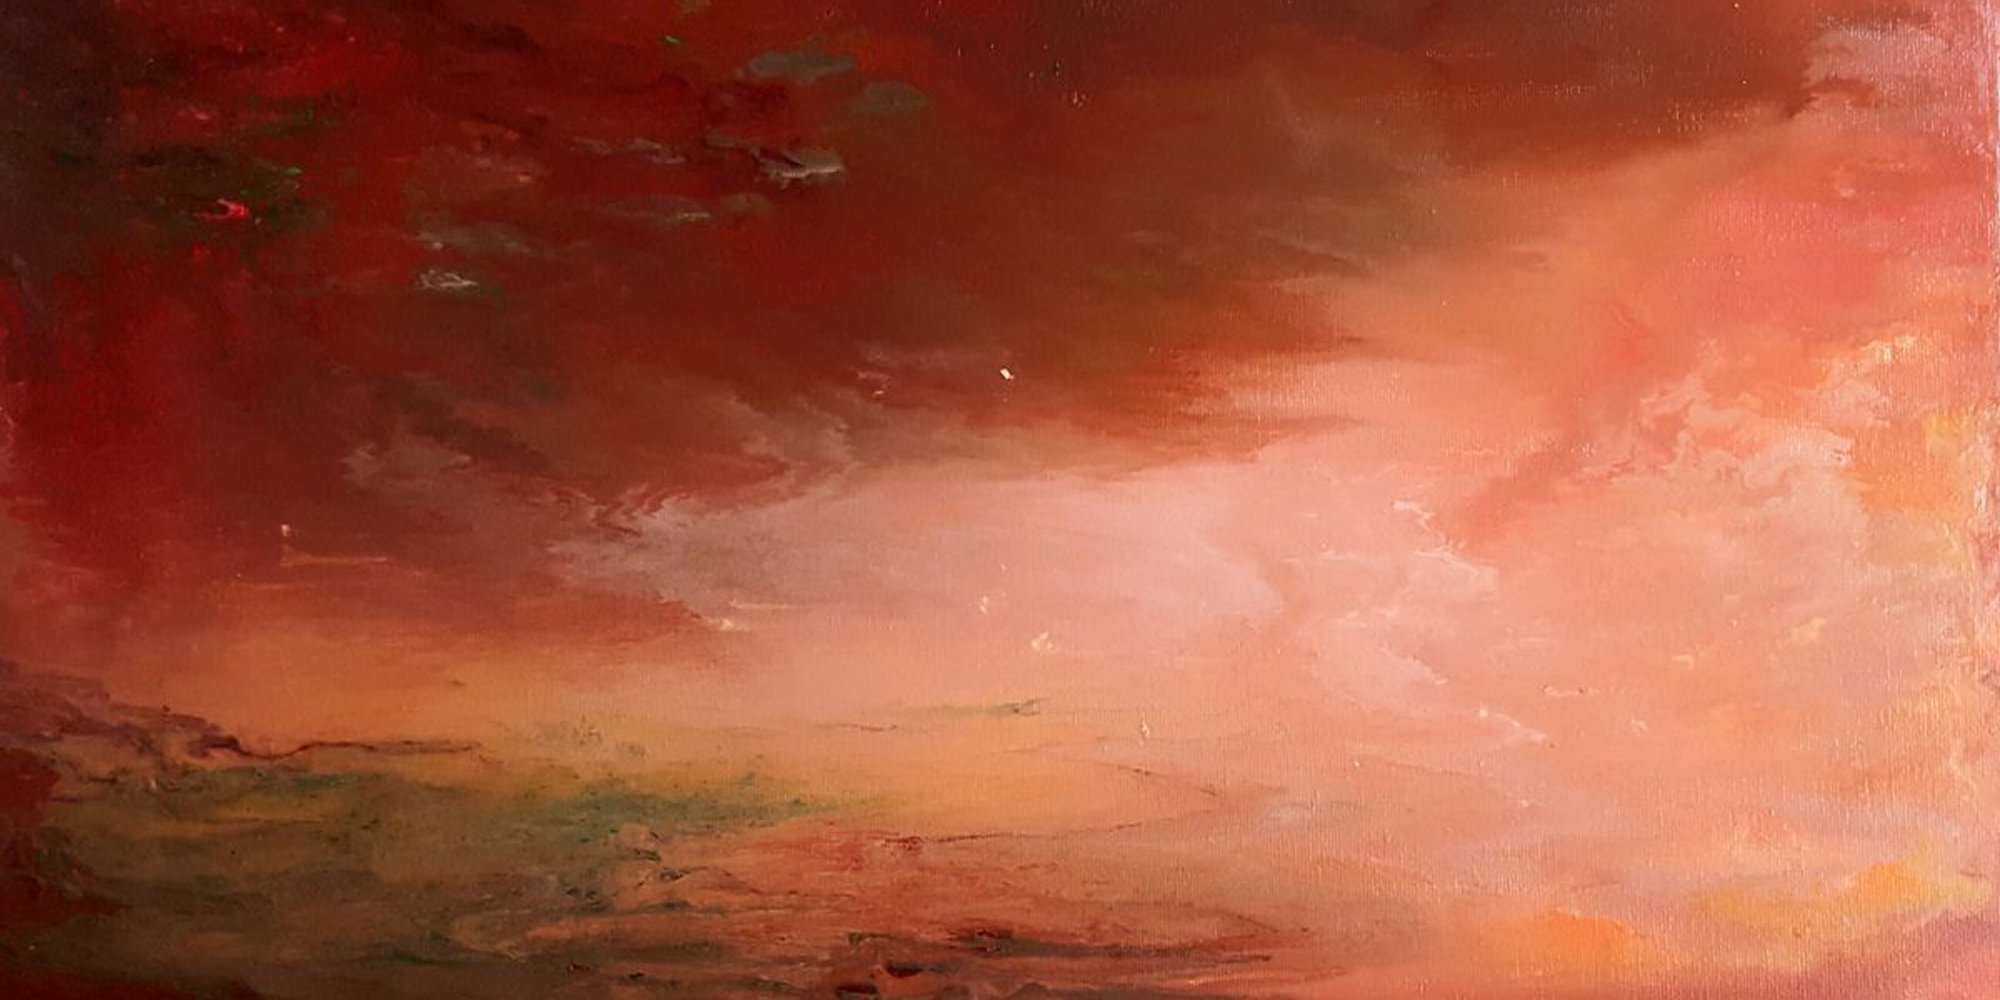 Art of the Day: "Martian storm" by Silvija Horvat